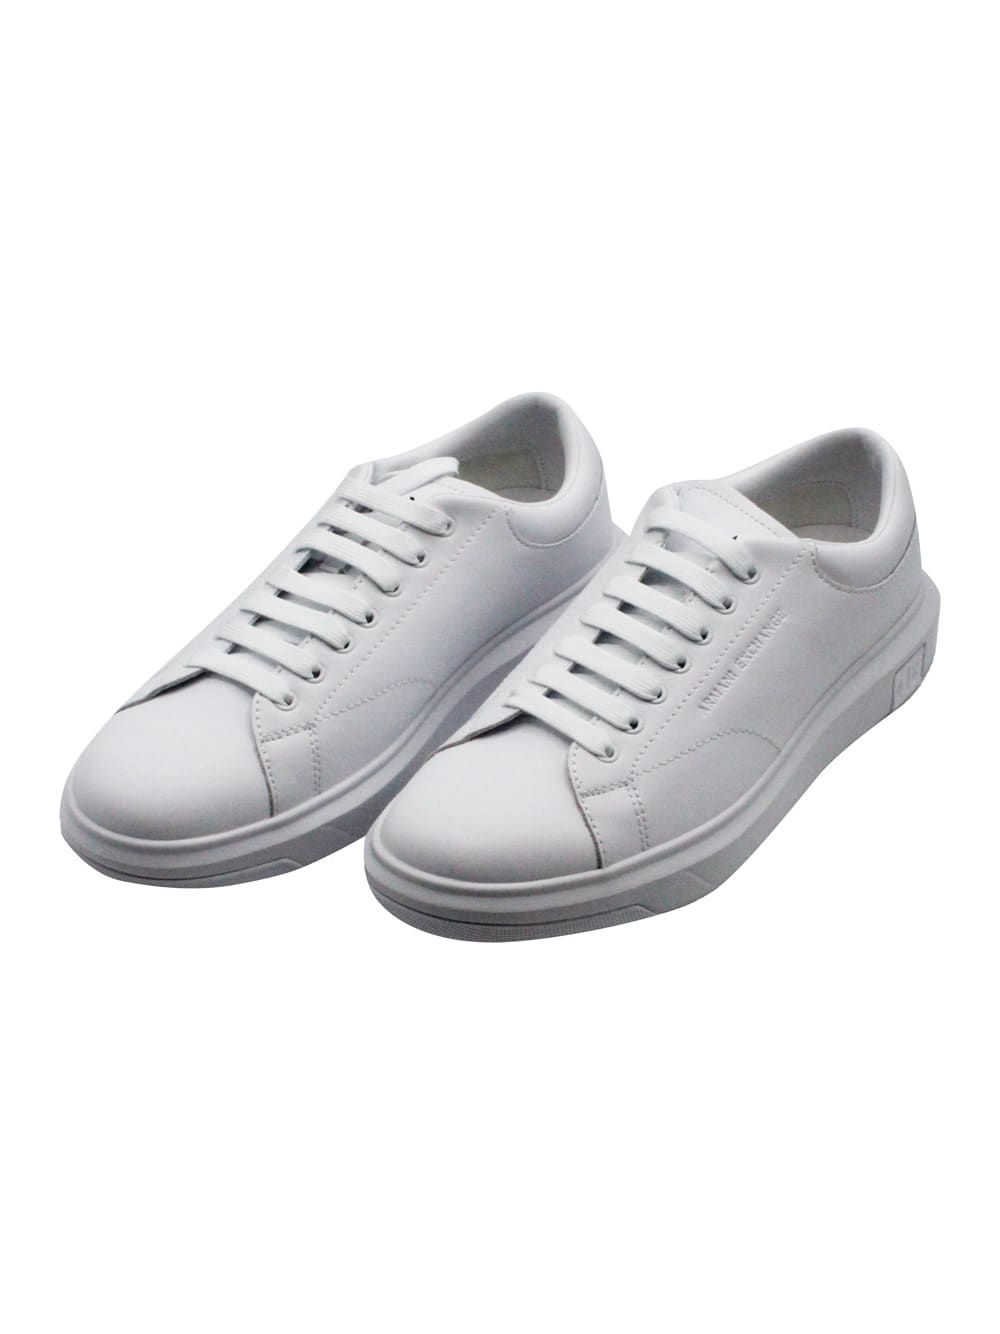 Shop Armani Collezioni Leather Sneakers With Matching Box Sole And Lace Closure. Small Logo On The Tongue And Back In White